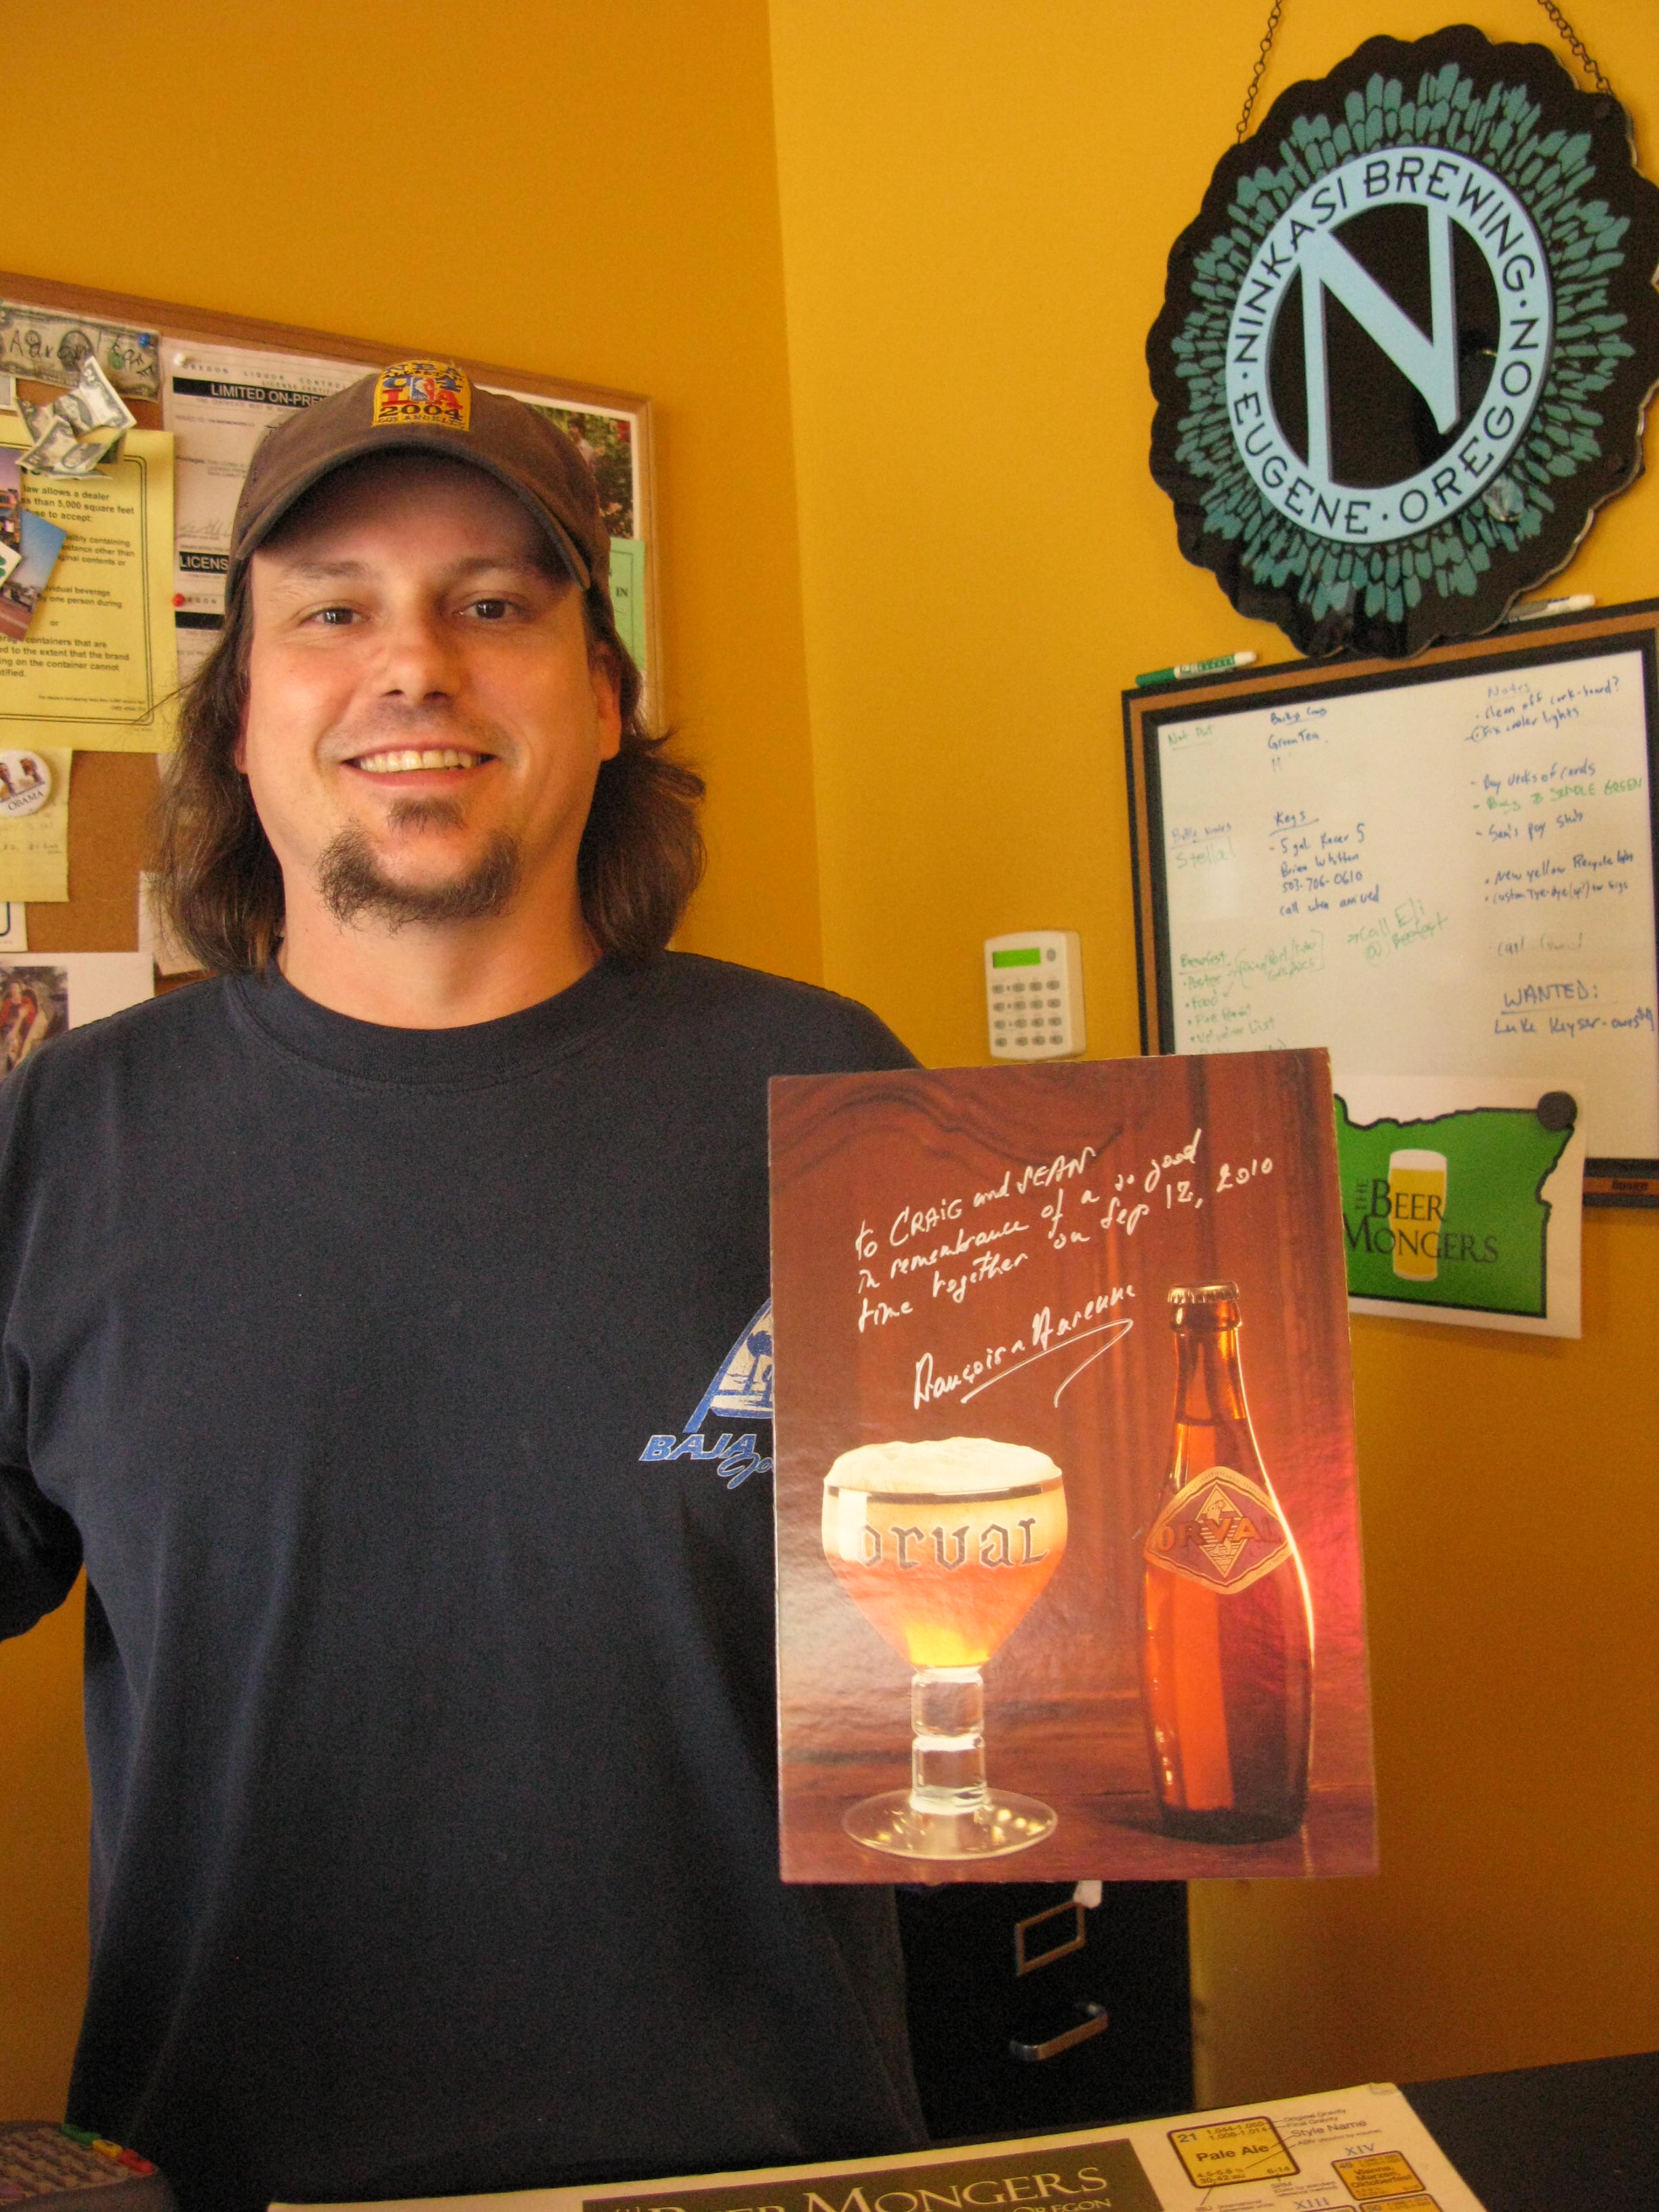 Orval is one of head BeerMonger Sean Campbell's favorite breweries and the annual Orval Day is one of the best loved events at the BeerMongers (1125 S.E. Division St. This year's edition starts at 3 p.m. Sunday, Dec. 13. FoystonFoto